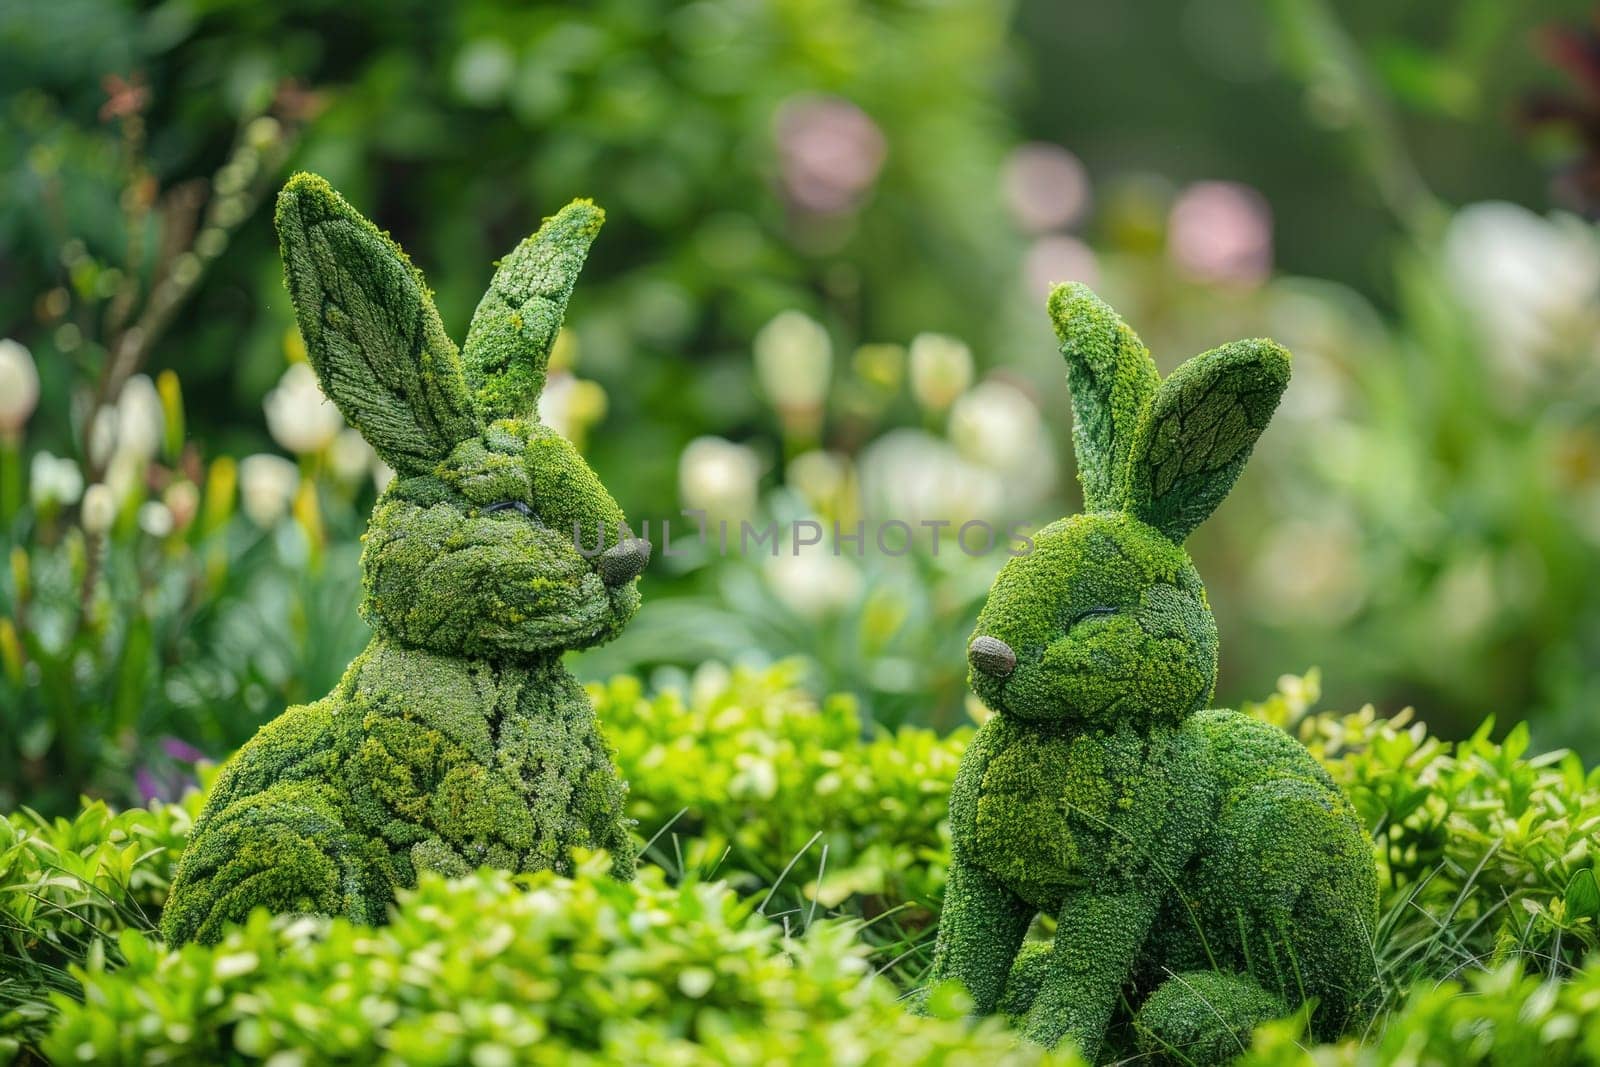 Grassy rabbits relaxing in vibrant garden surrounded by flowers and shrubs by Vichizh